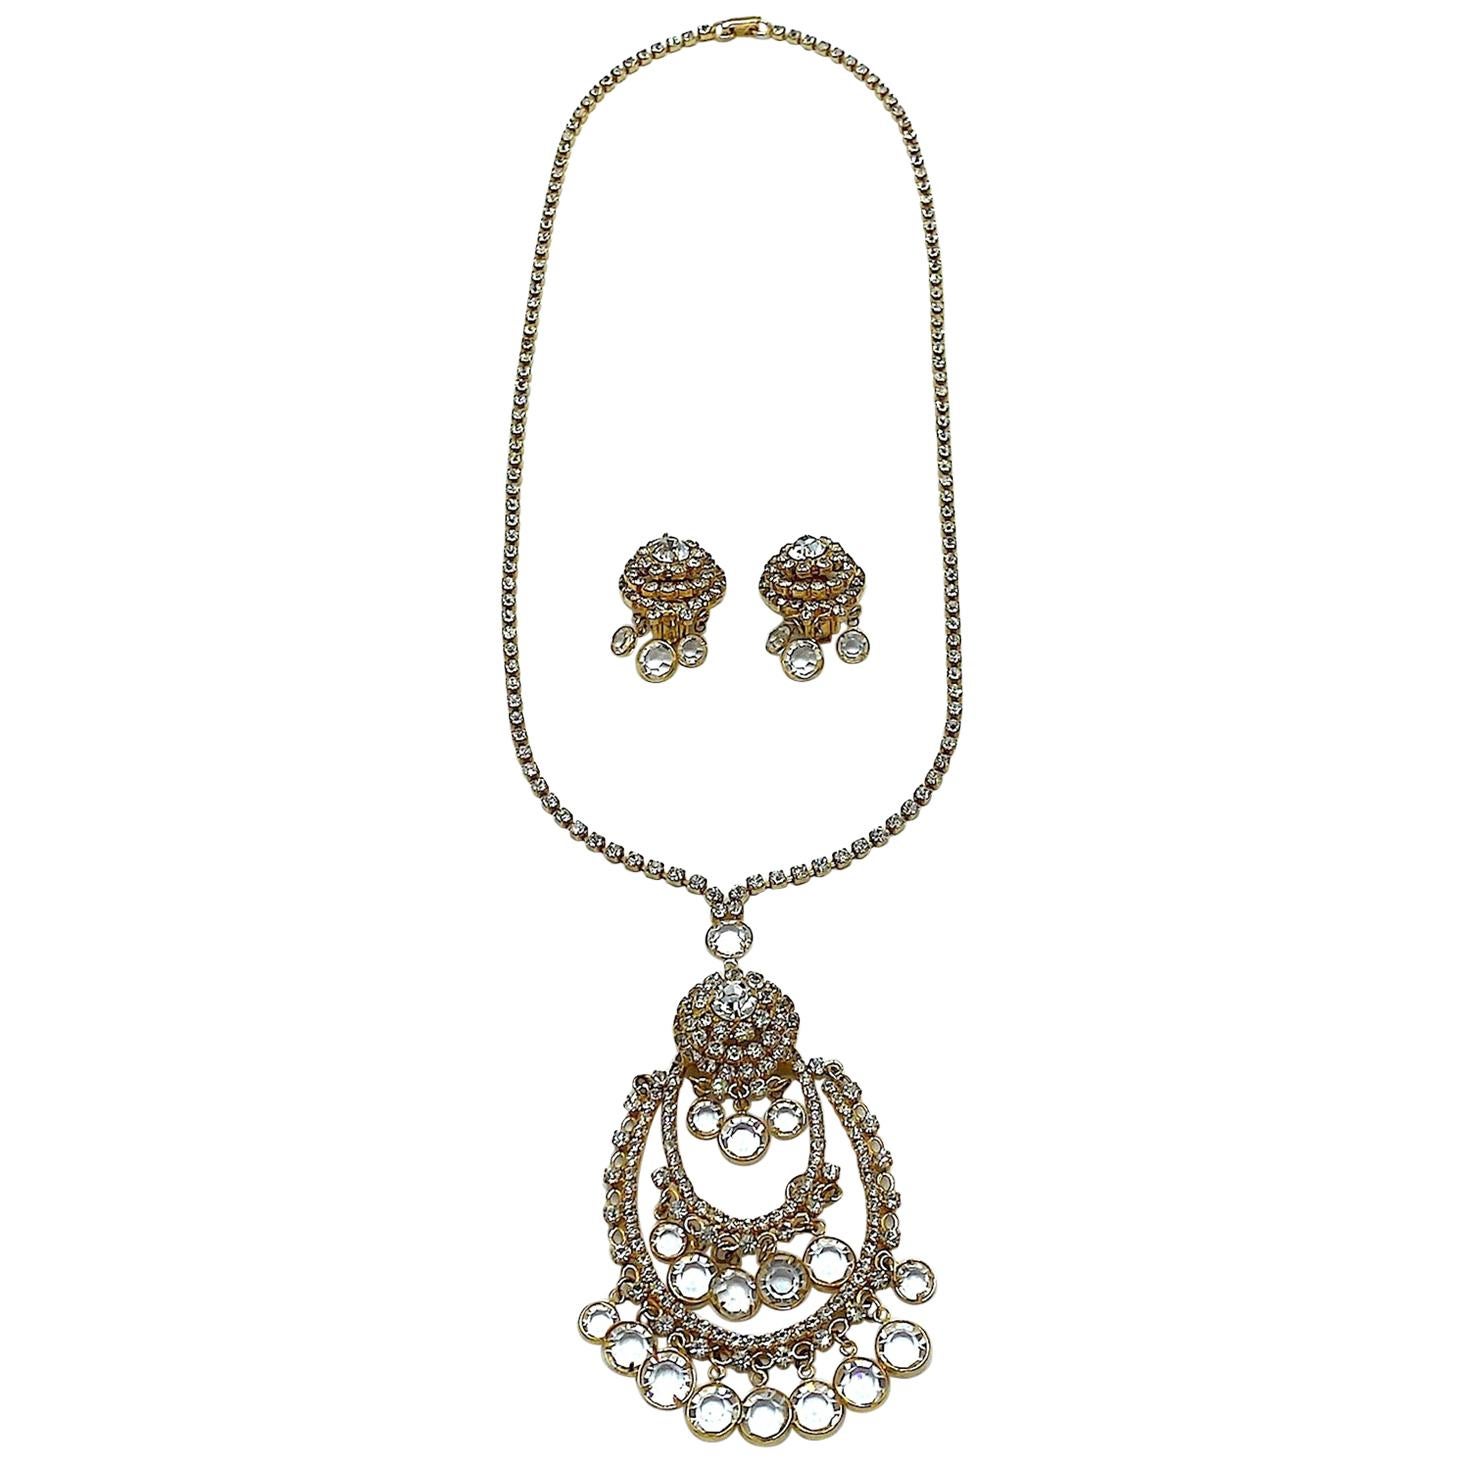 1960s Gold with Rhinstones & Crystals Pendent Necklace and Earring Set